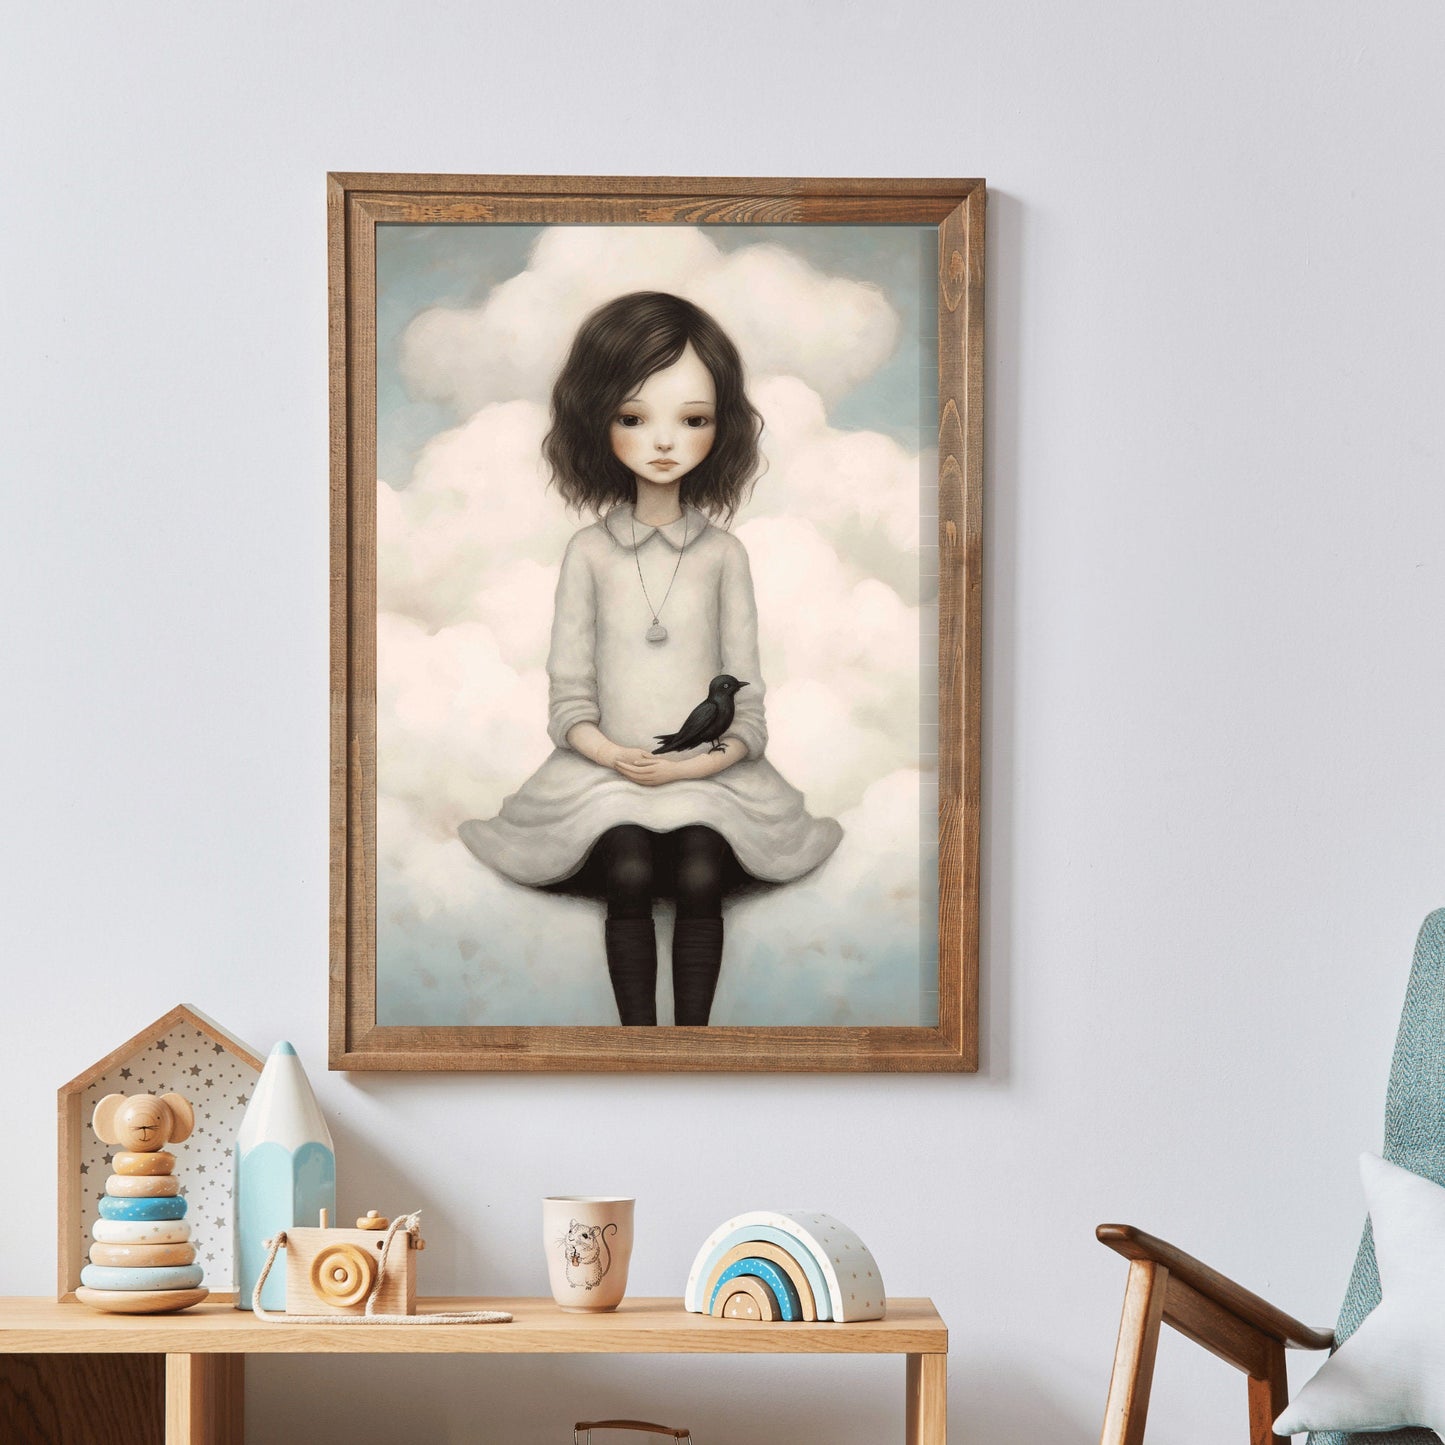 Vintage Wall Art, Little Girl on Cloud with Black Bird, Digital Printable Art, Unique & Quirky Nursery or Girl's Room Decor